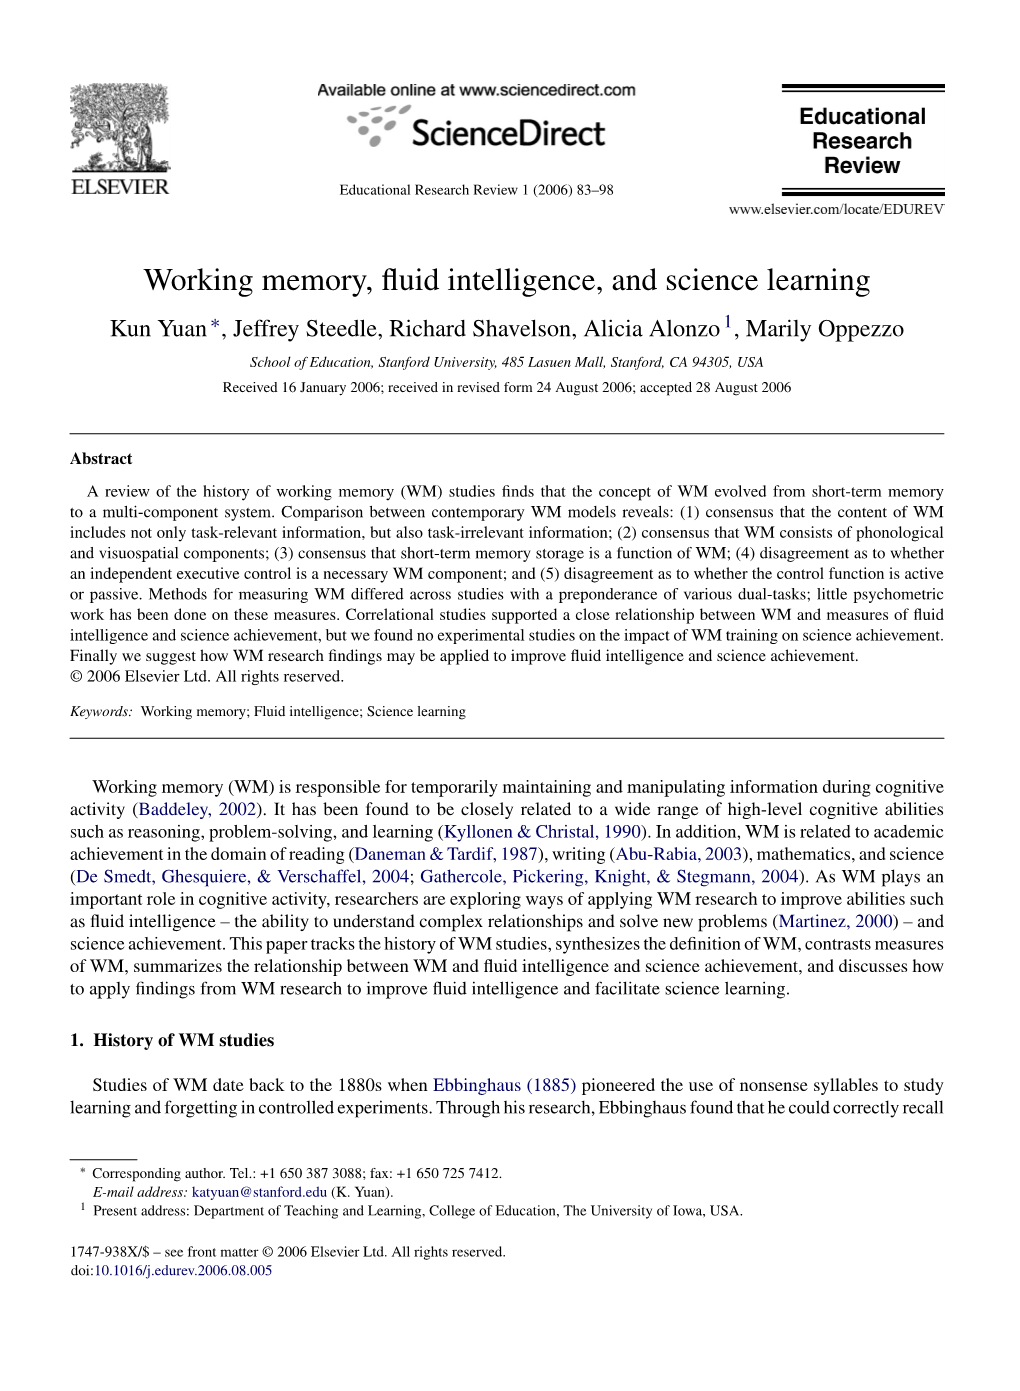 Working Memory, Fluid Intelligence, and Science Learning